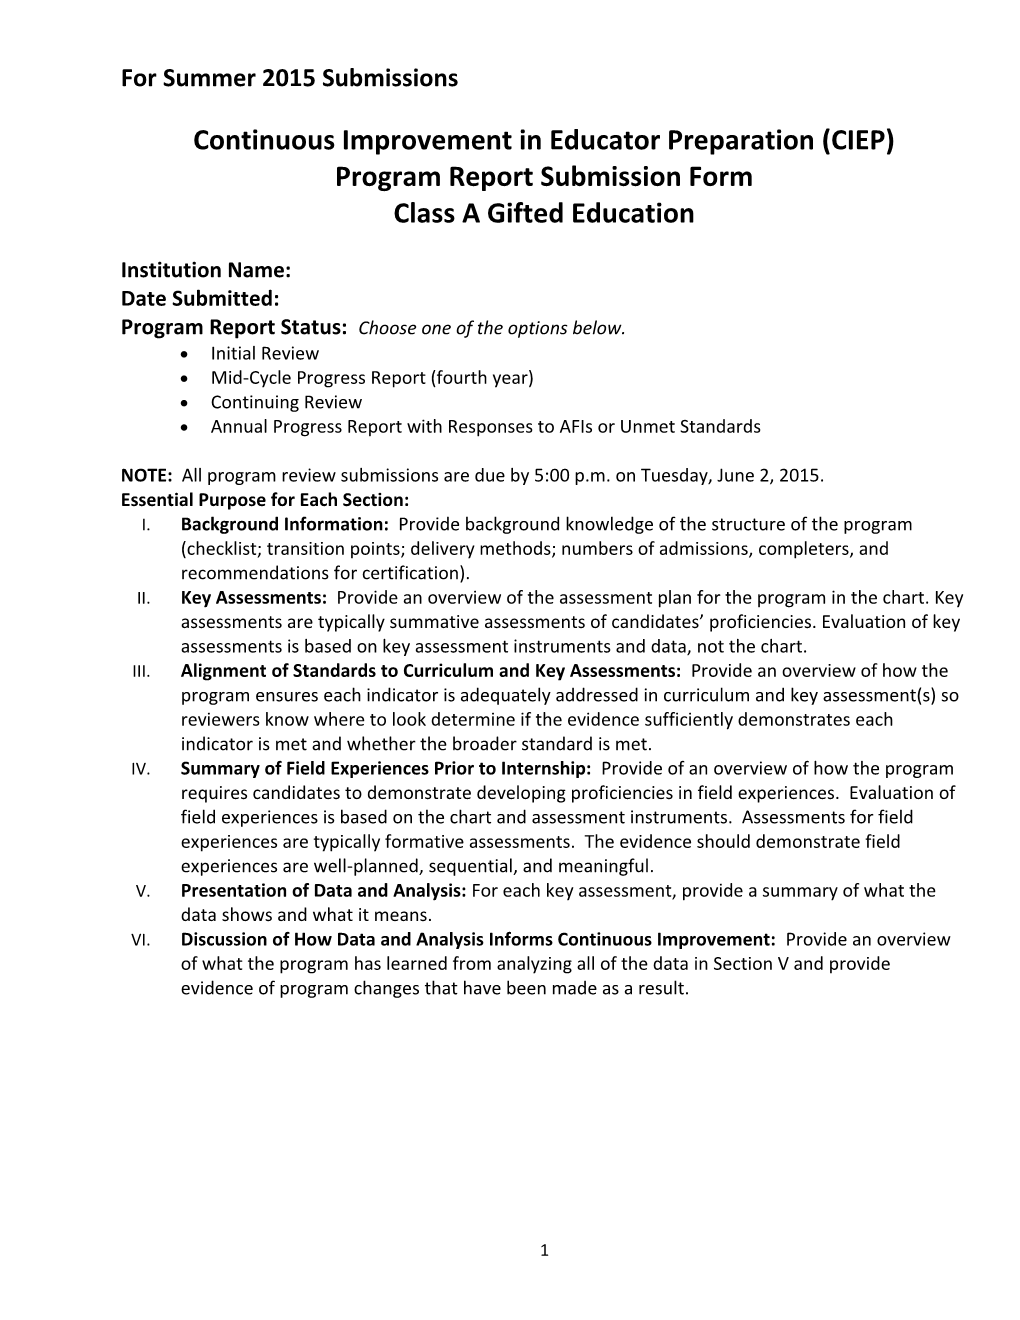 CIEP Template 43 Gifted 2015